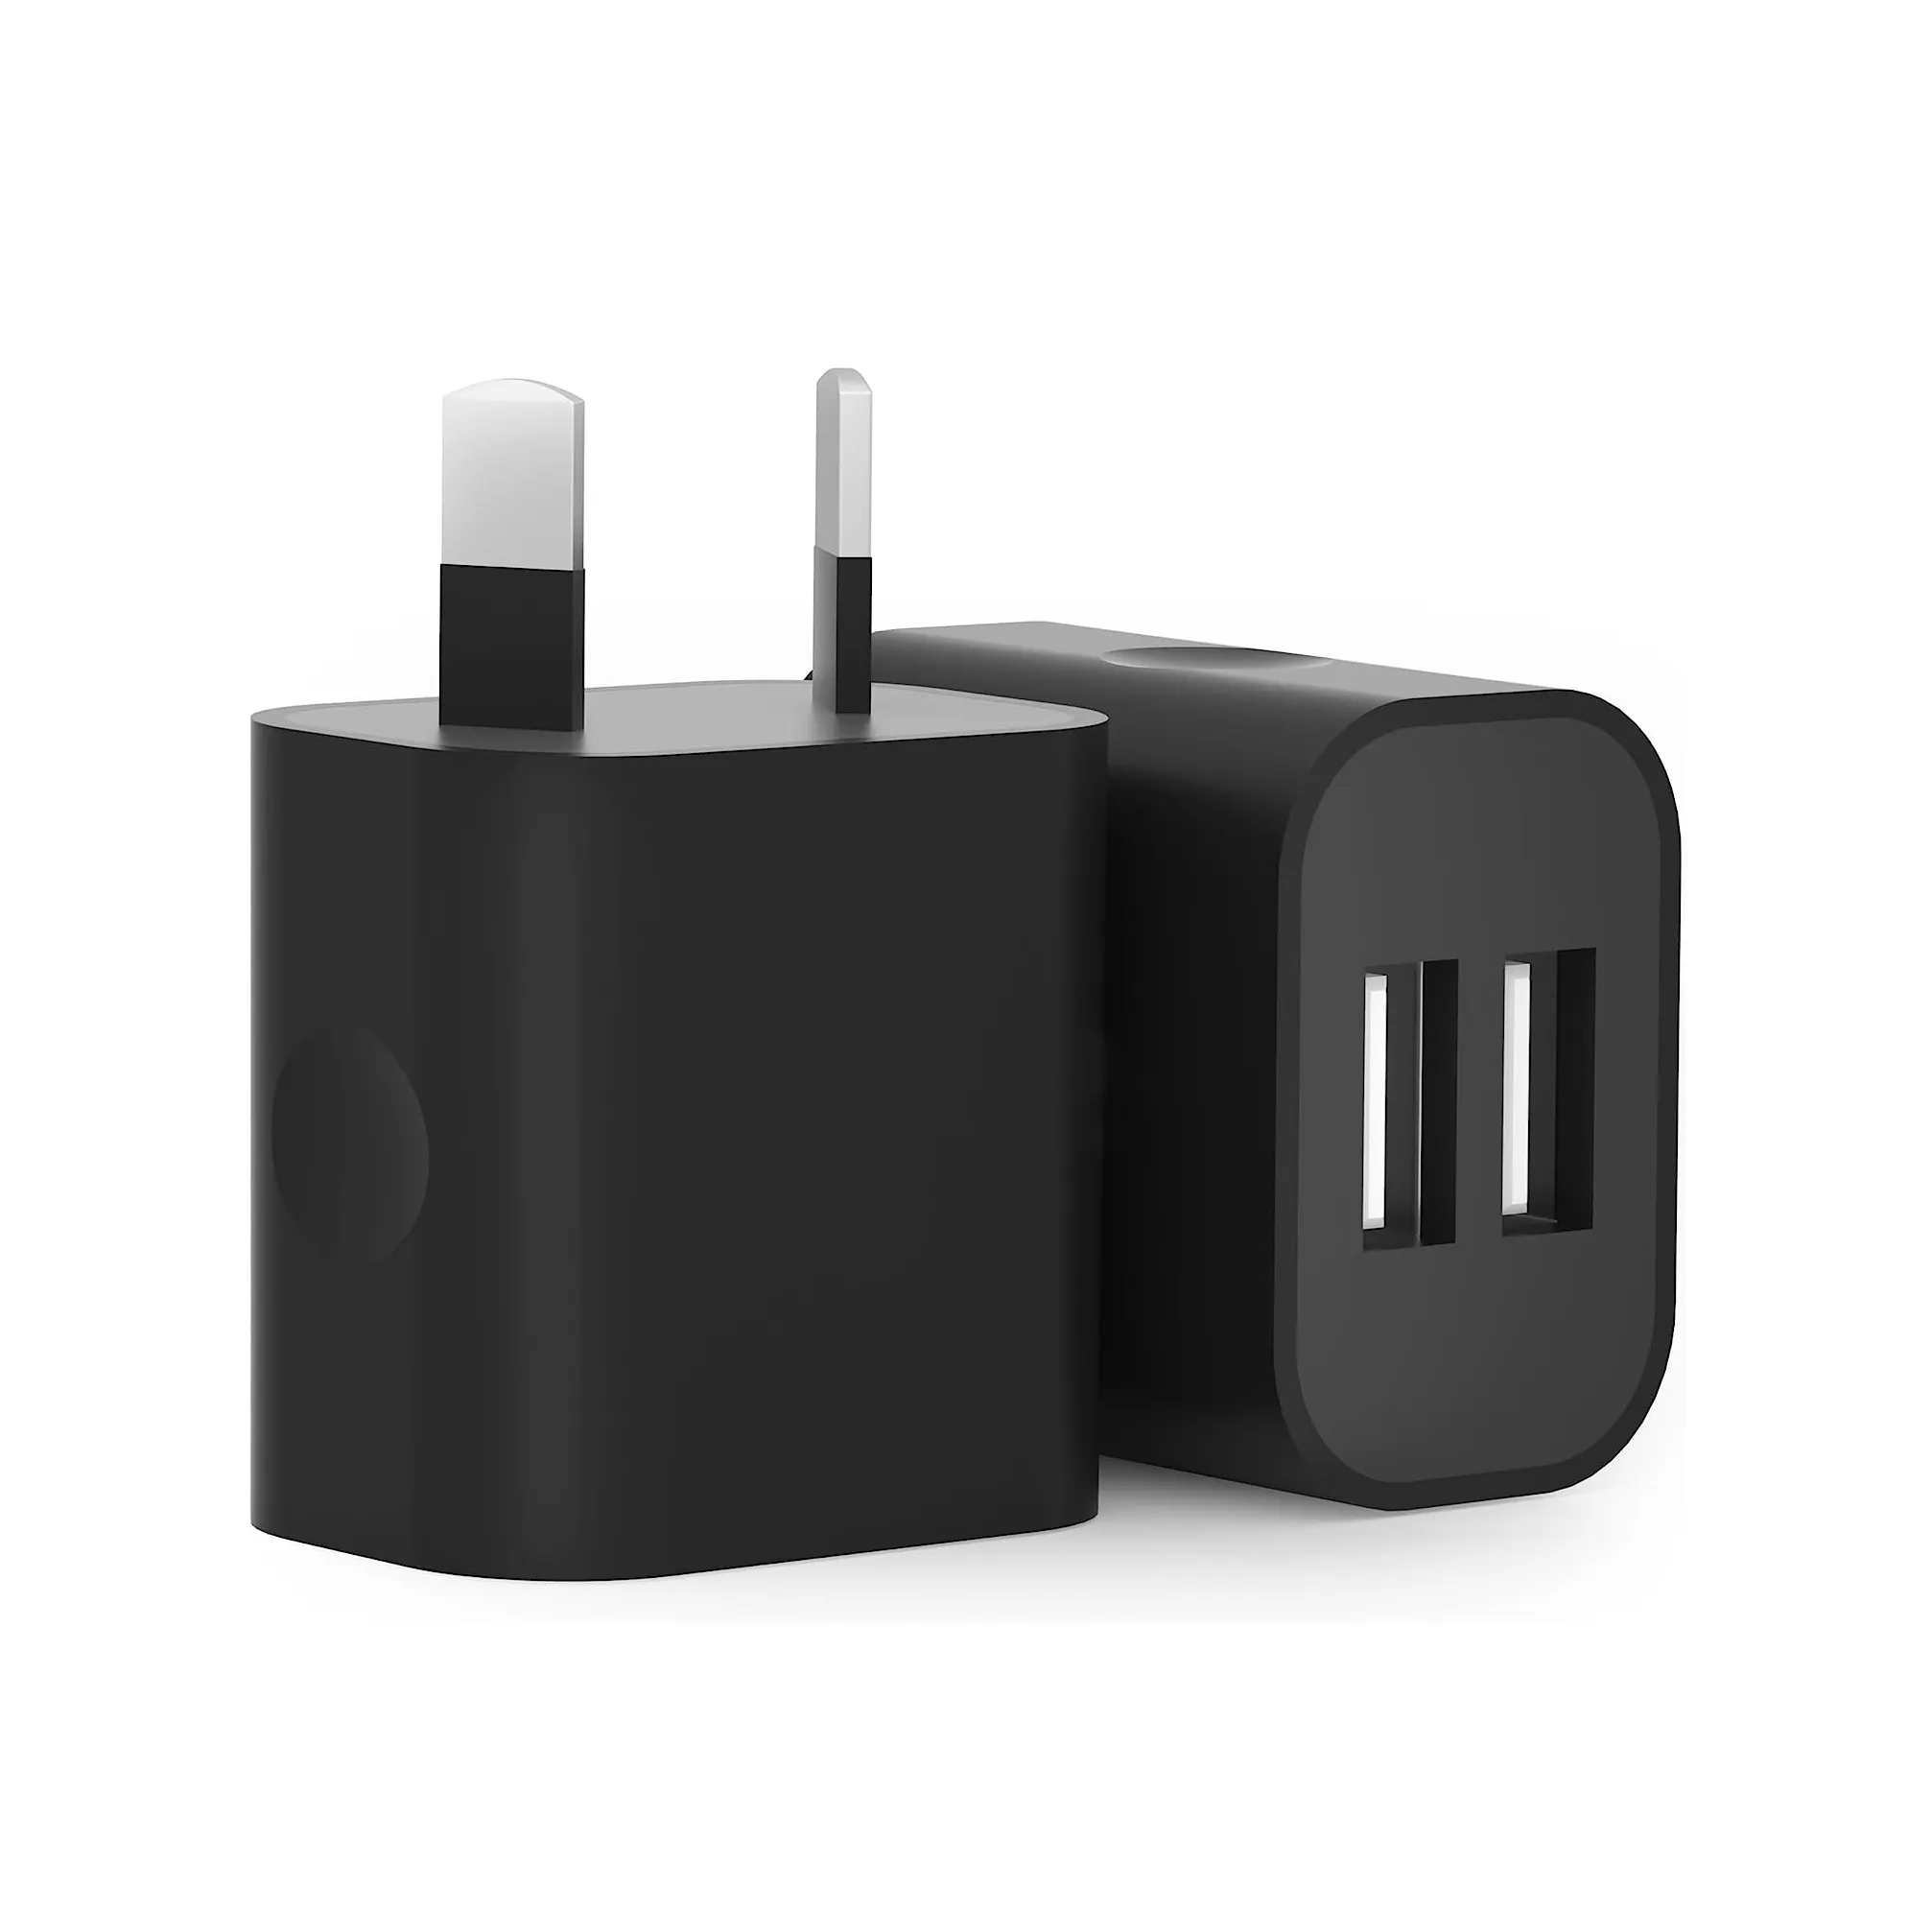 interface USB Power Adapter 5V 2A Australia New Zealand AU Plug Wall Charger Smart Phone Car Interior Accessories